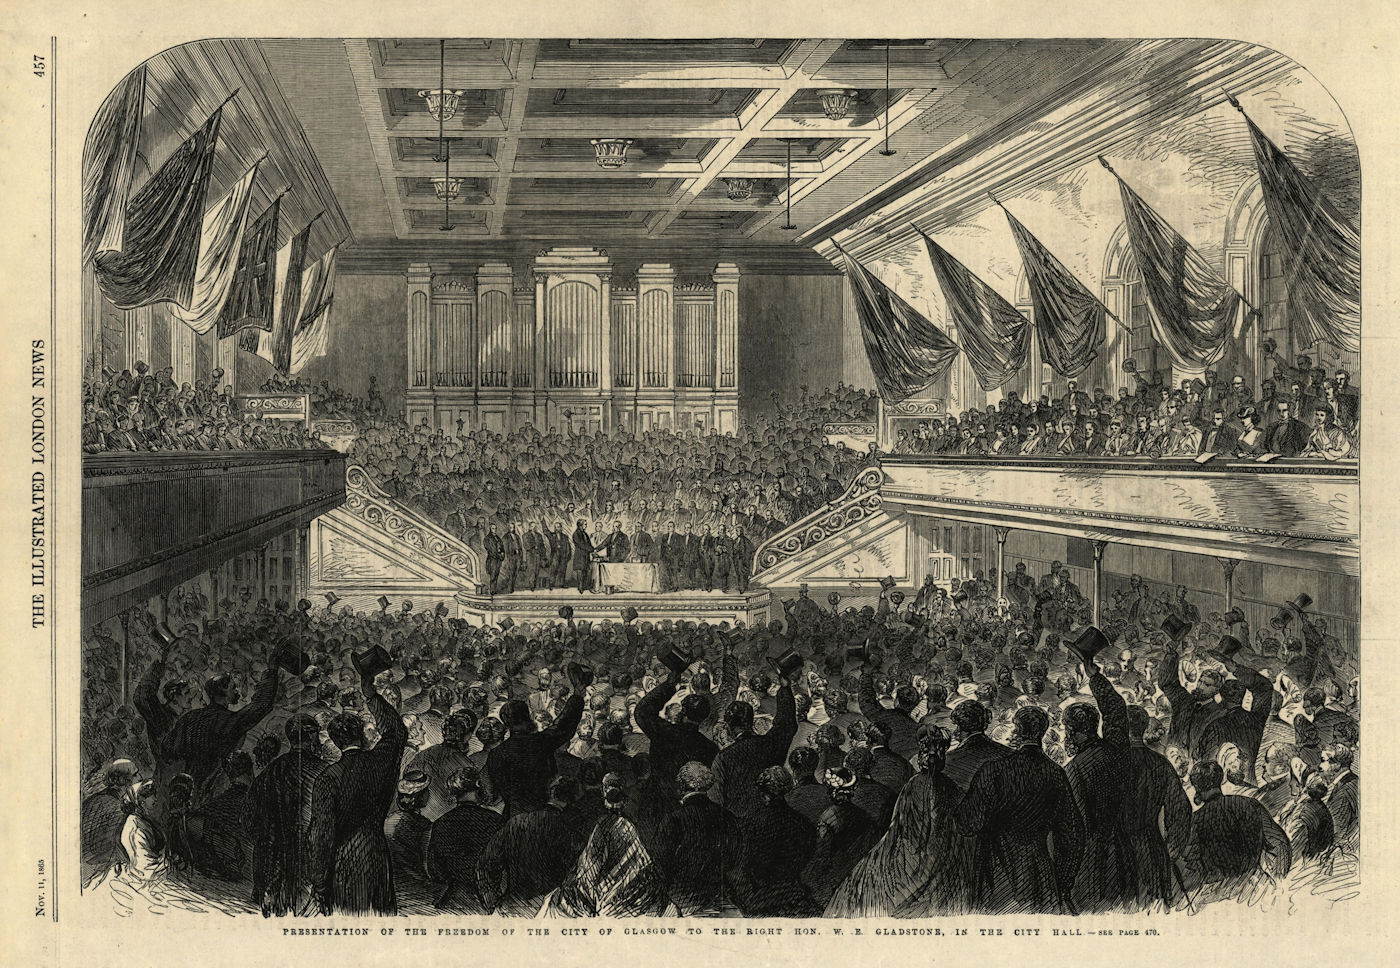 W. E. Gladstone receiving the freedom of the city in Glasgow city hall 1865